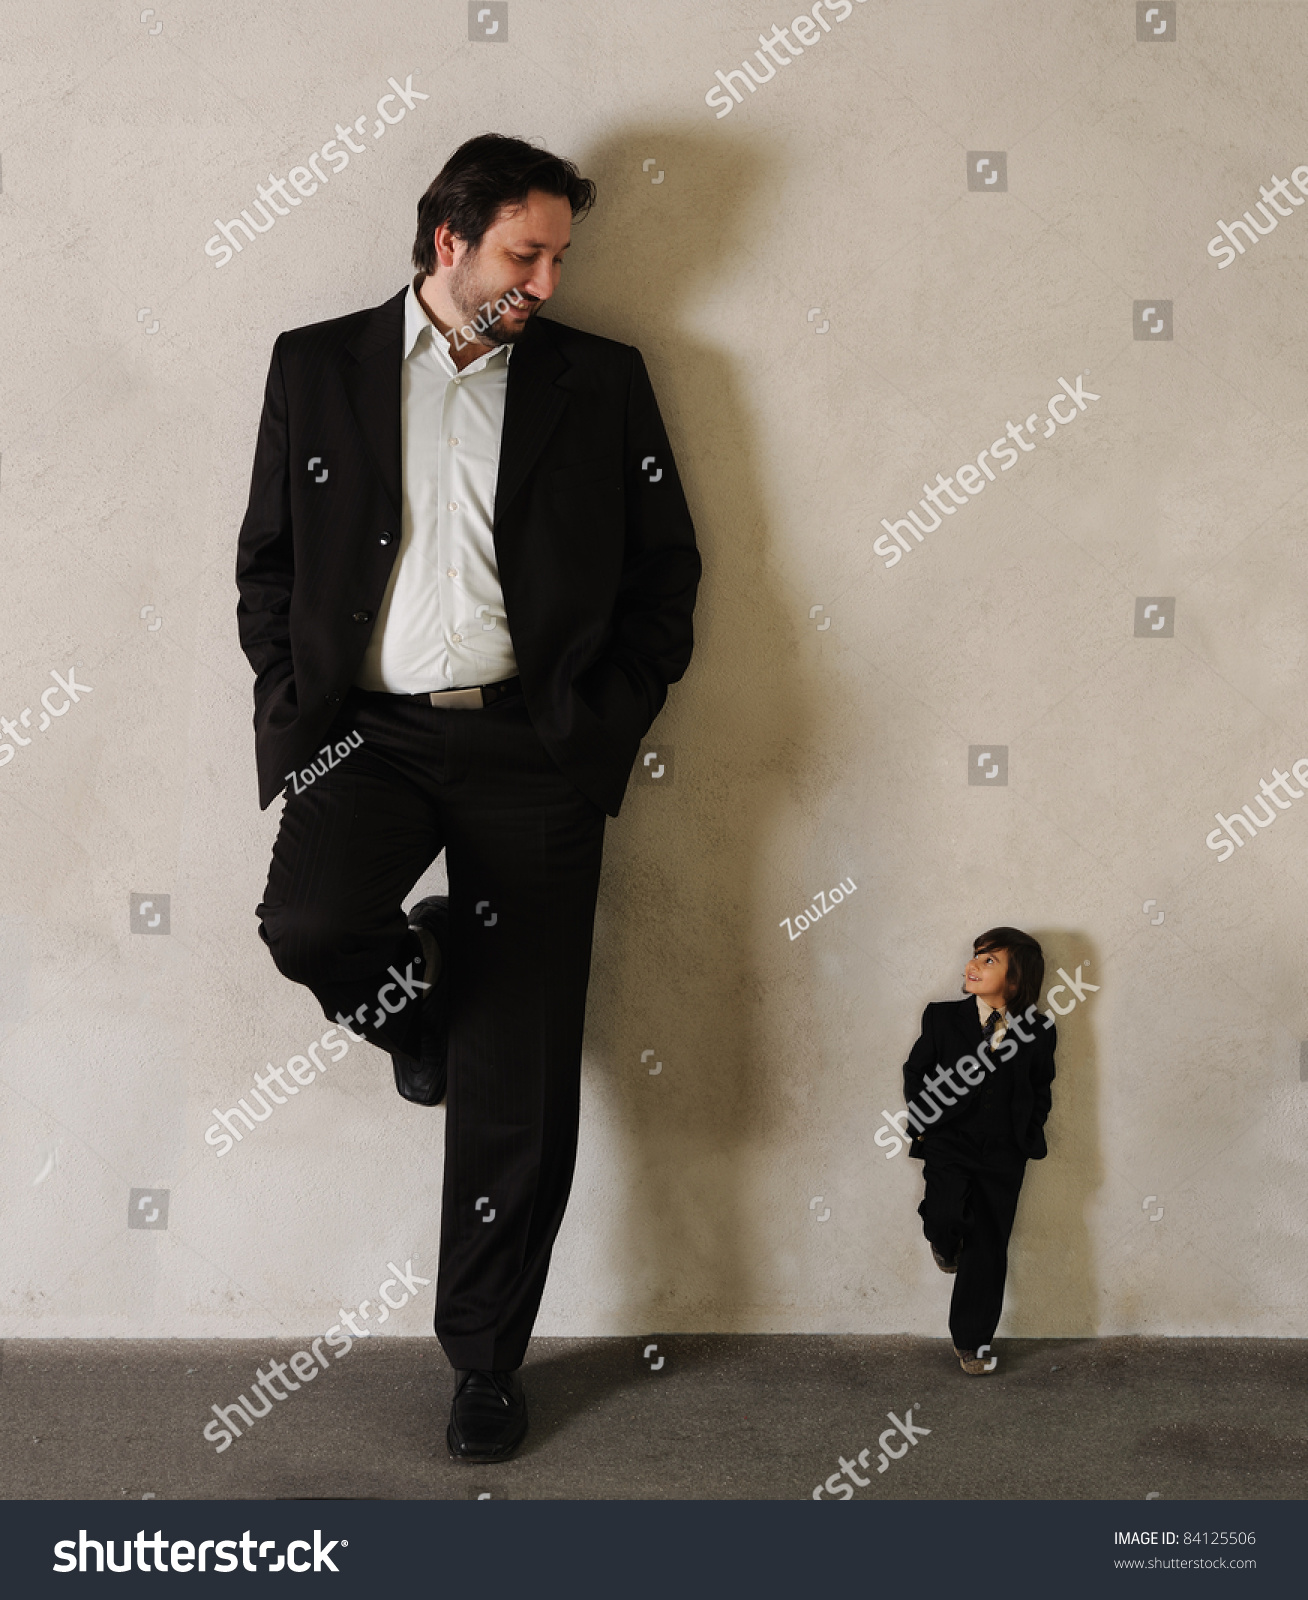 1,485 Giant and dwarf Images, Stock Photos & Vectors | Shutterstock